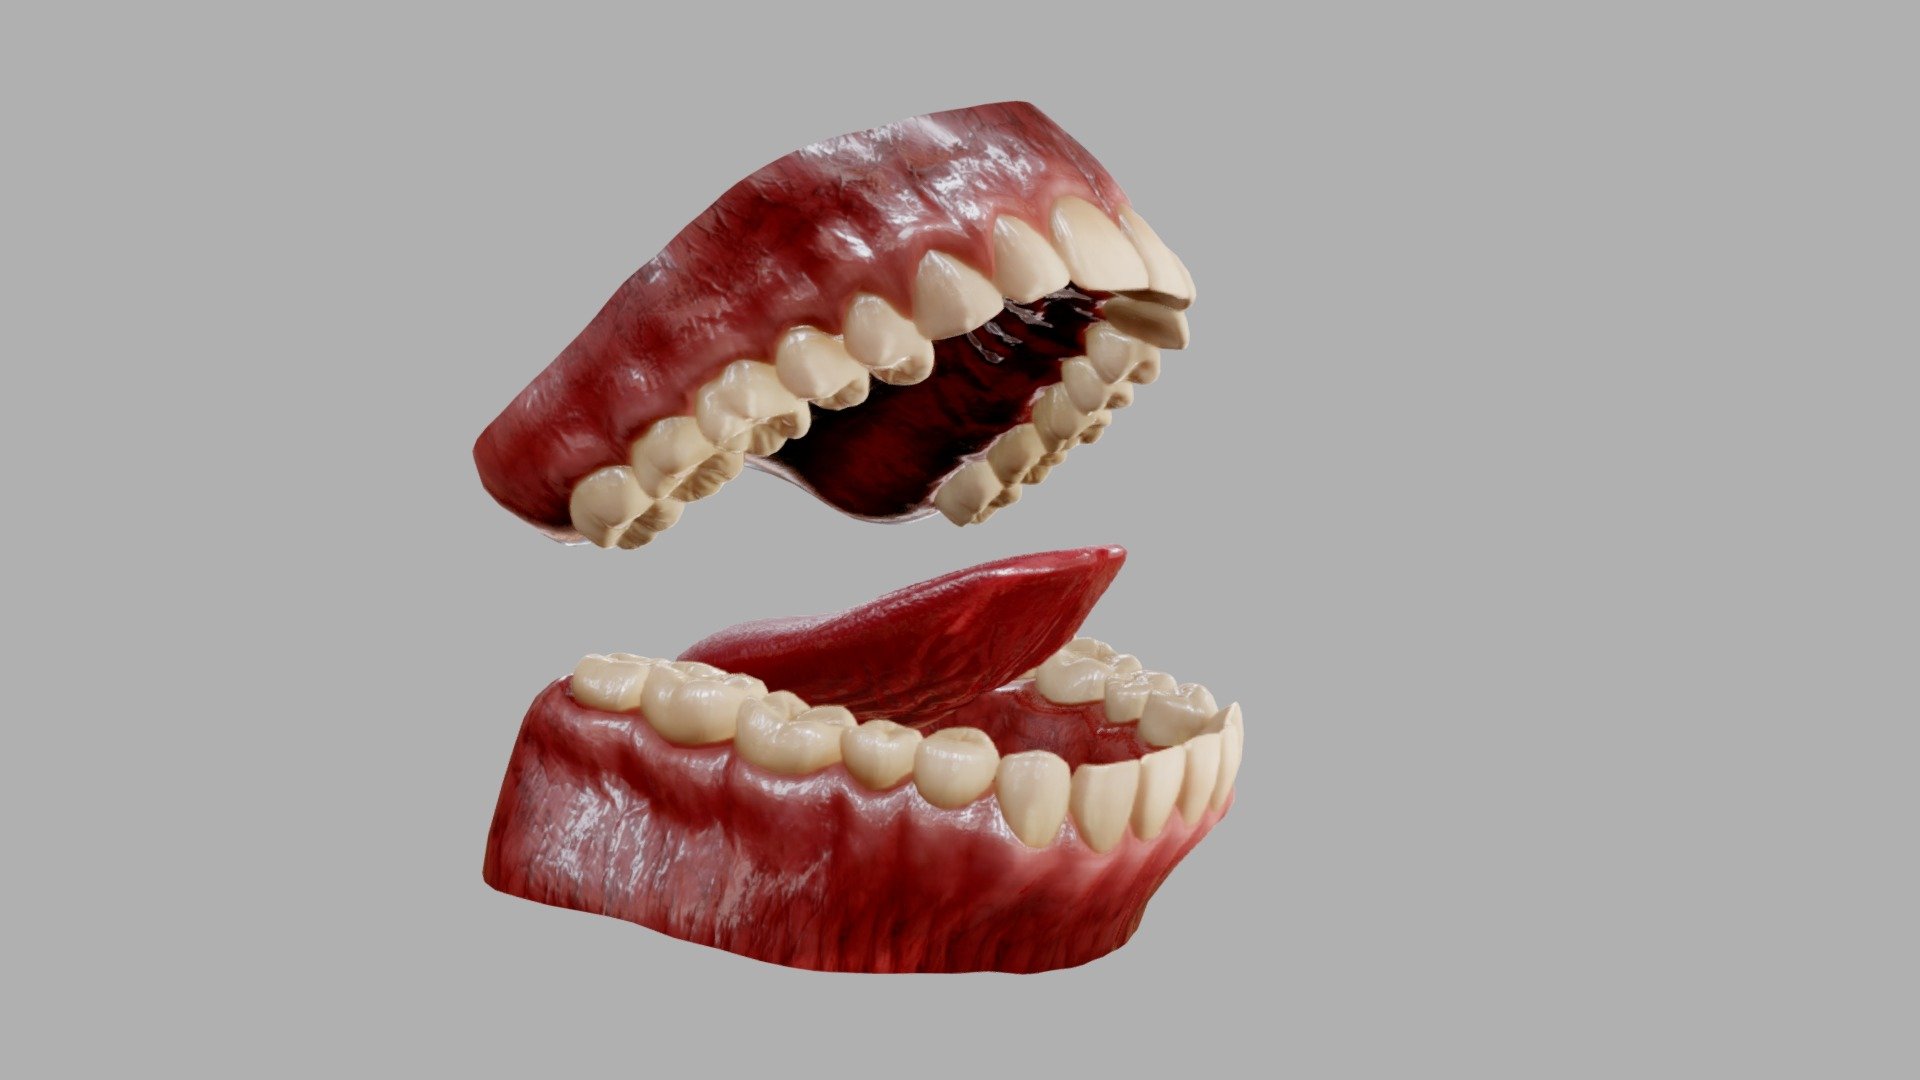 High quality 3D model of the Gums Teeth and Tongue for films/ games / animations / apps / VR / AR with PBR 4k textures

Clean topology based on quads and tris. This model is completely UVunwrapped. 

Textures
-Includes 4K PBR textures

Total:
-Polygons: 21146
-Vertices: 21307

Additional Notes
-If you have any problem or question about this model please content me and I will be response as soon as possible . and leave thumb up if you like the model also give a postive rate if you bought this model and you like it.
-Please make sure to check out my other Models, you may find something prefect for your project. Thanks :) - Gums Teeth and Tongue - 3D model by Cheboksary 3d model